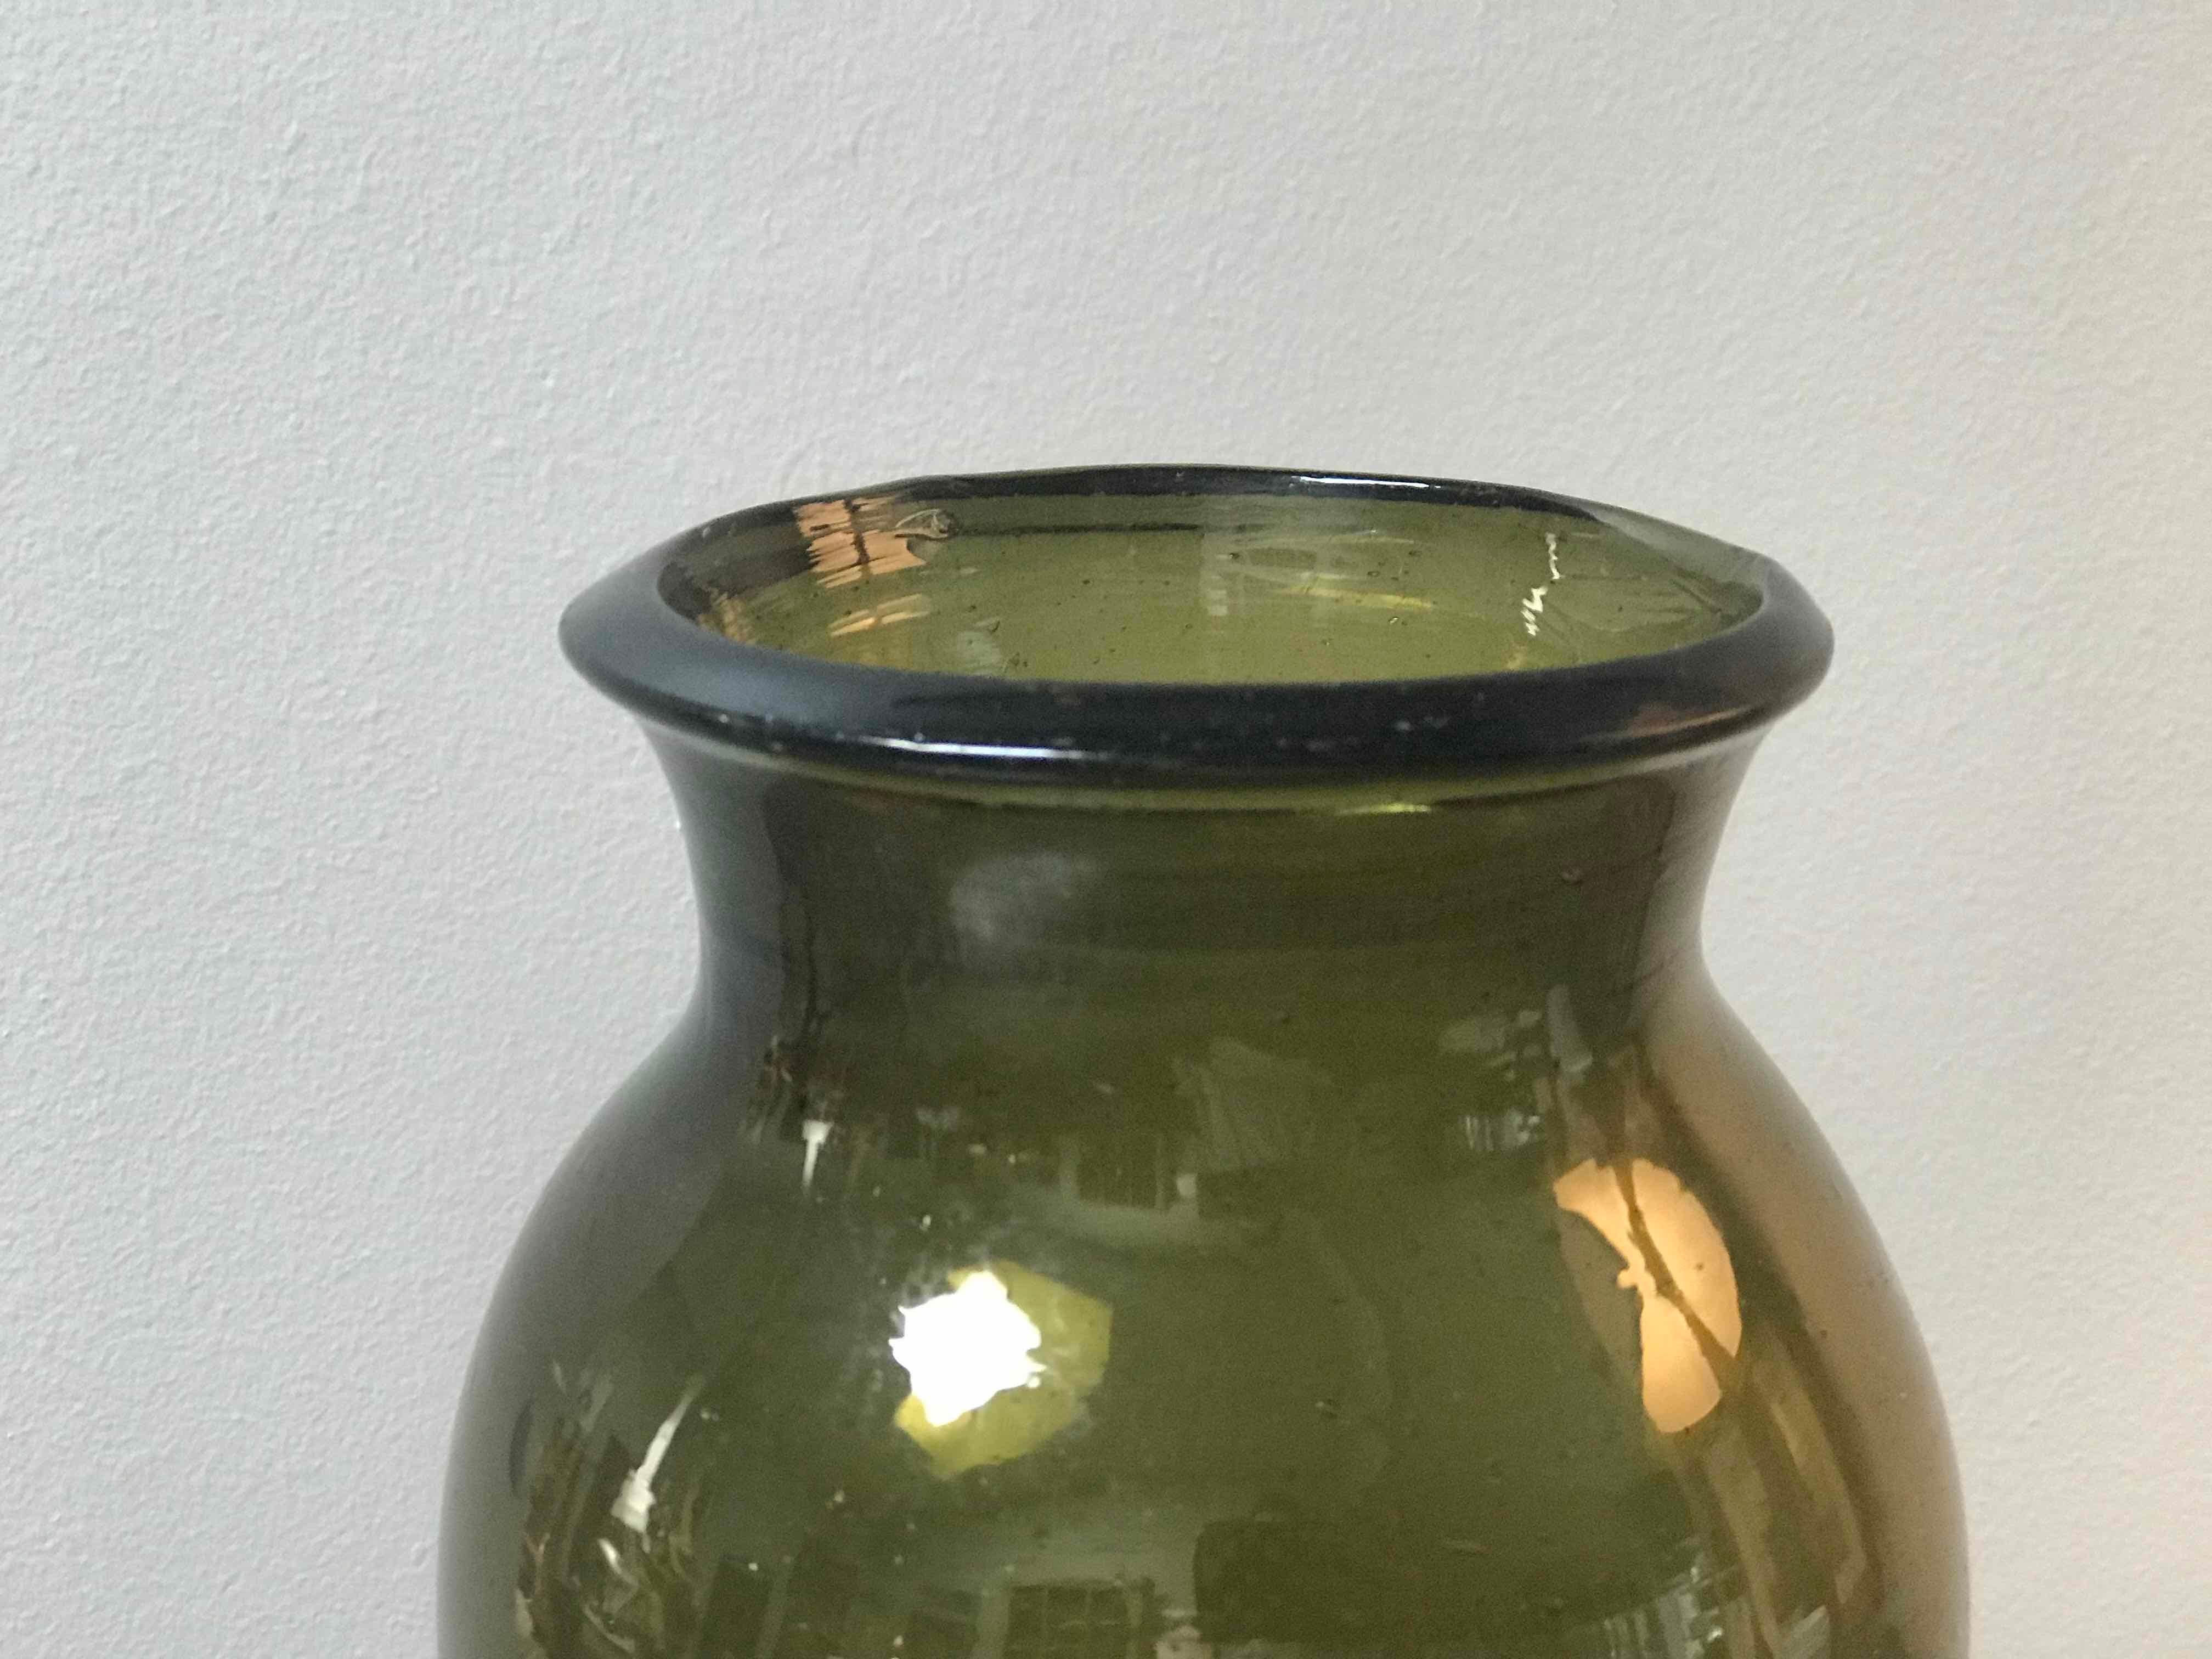 French Green Hand Blown Glass Bottle from Mid-19th Century France